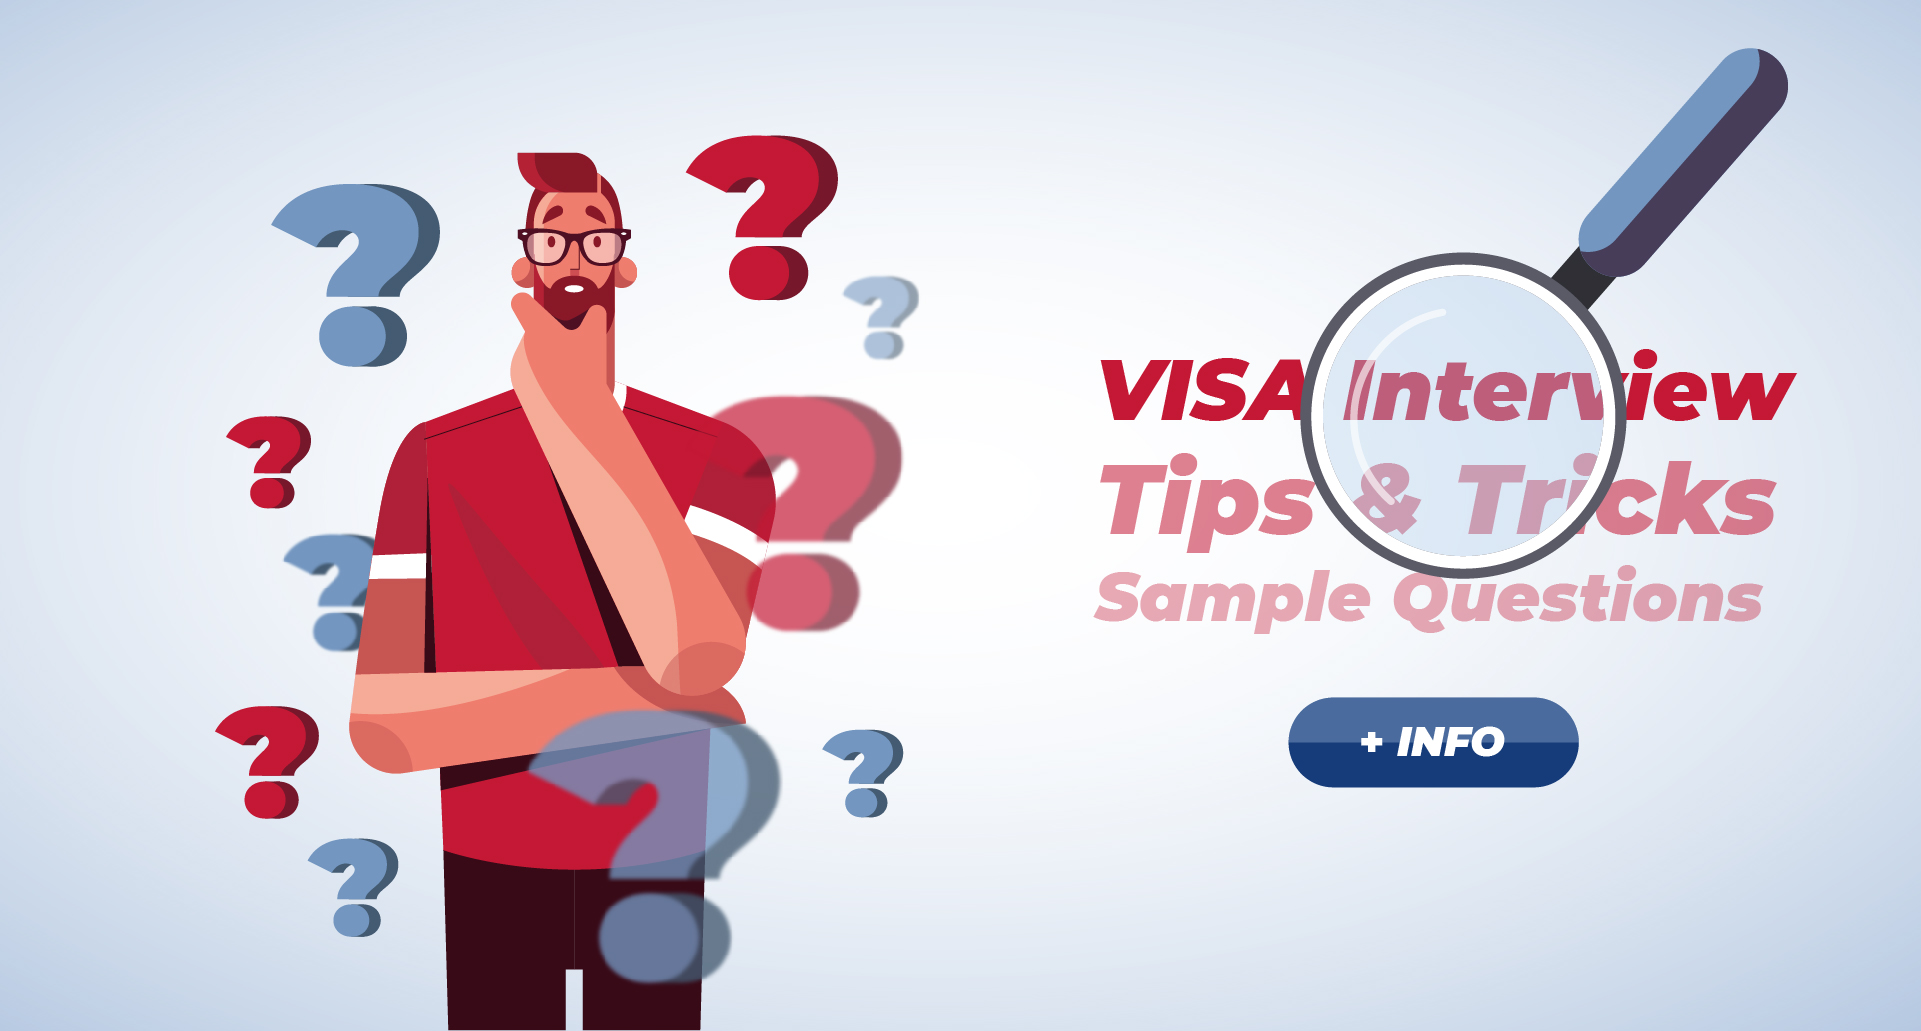 Everything you need to know about VISA interview